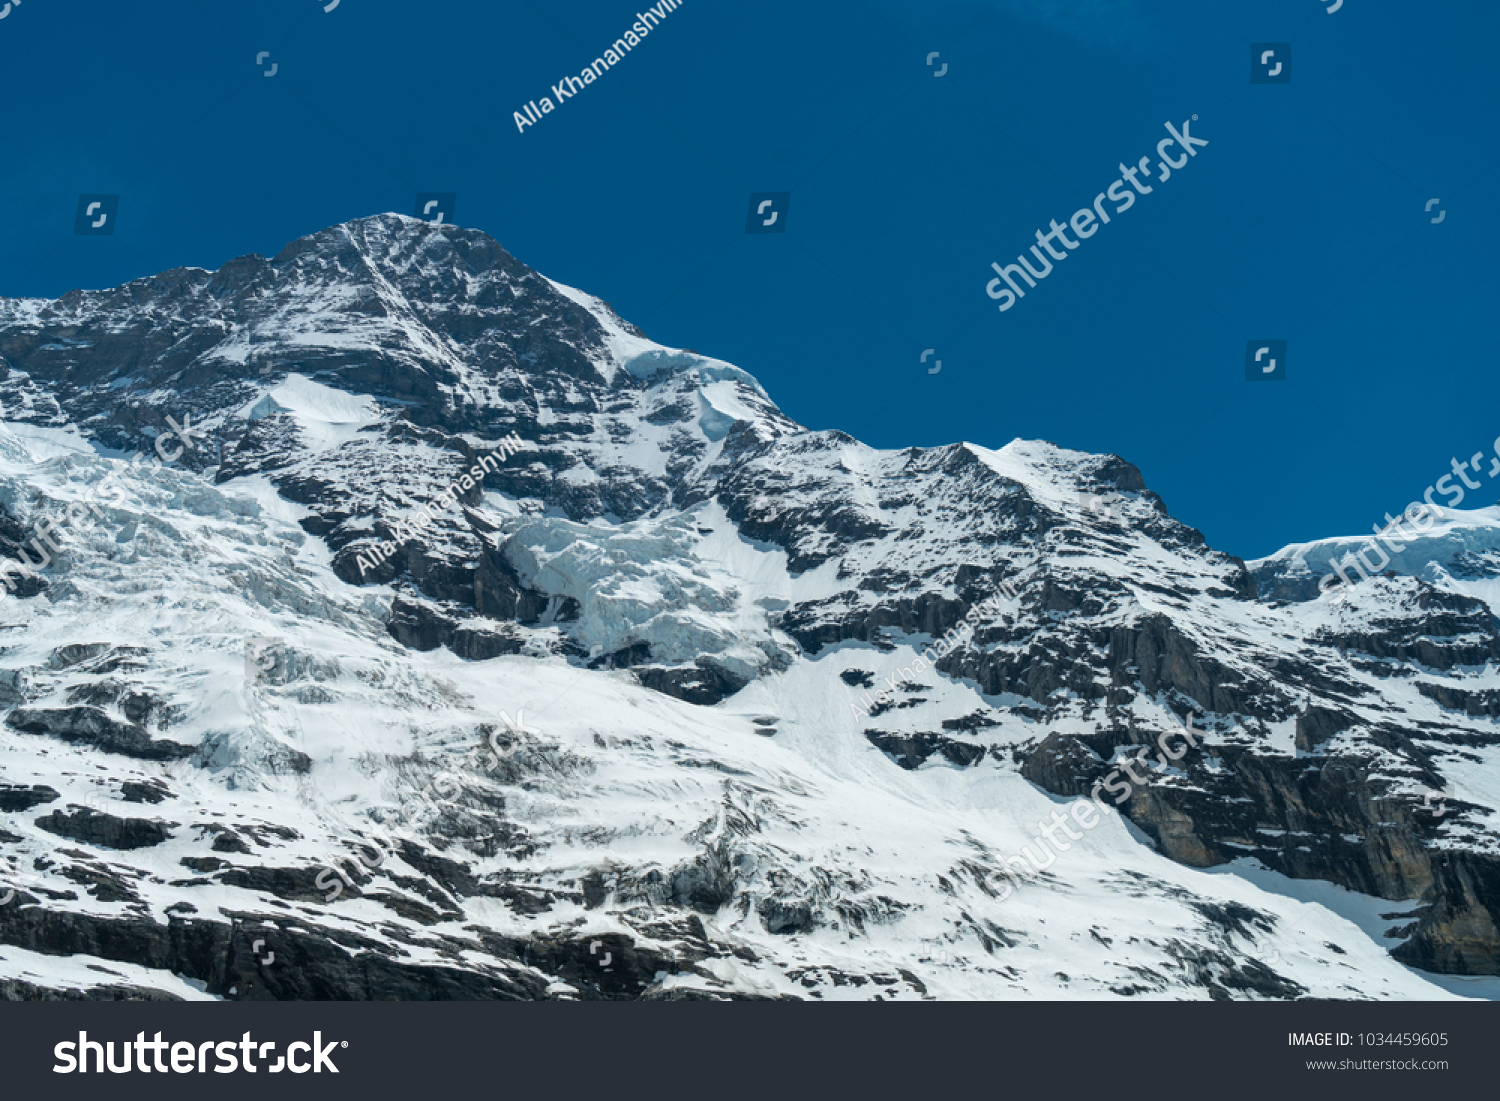 Spectacular view of the mountain Jungfrau and the four thousand meter peaks in the Bernese Alps from Greendeltwald valley, Switzerland #1034459605